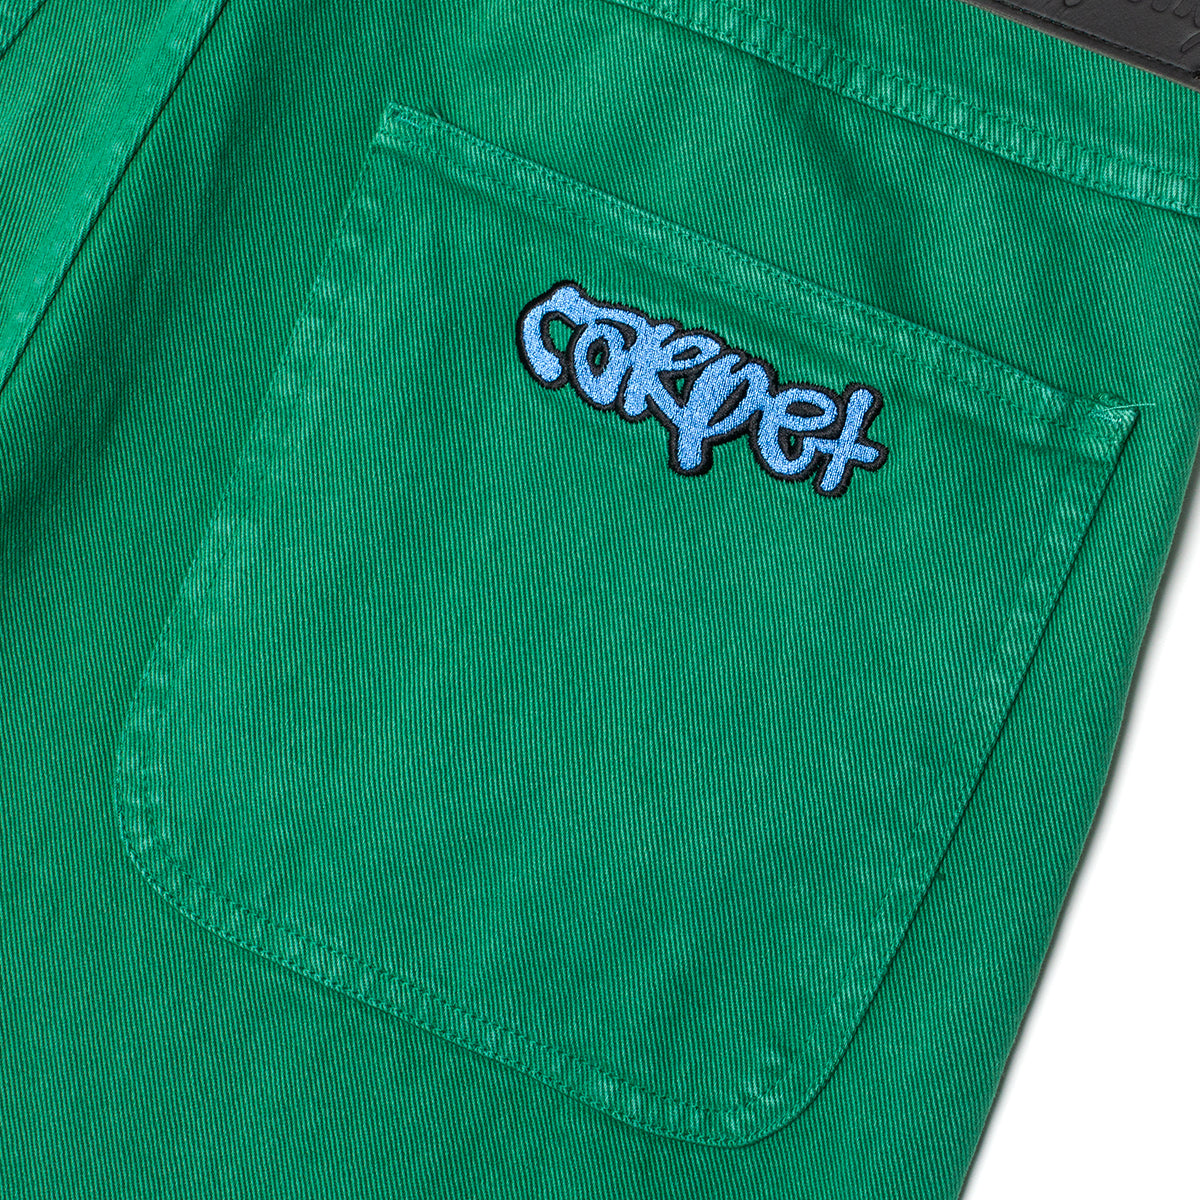 Carpet Company Bully Work Jeans  Green